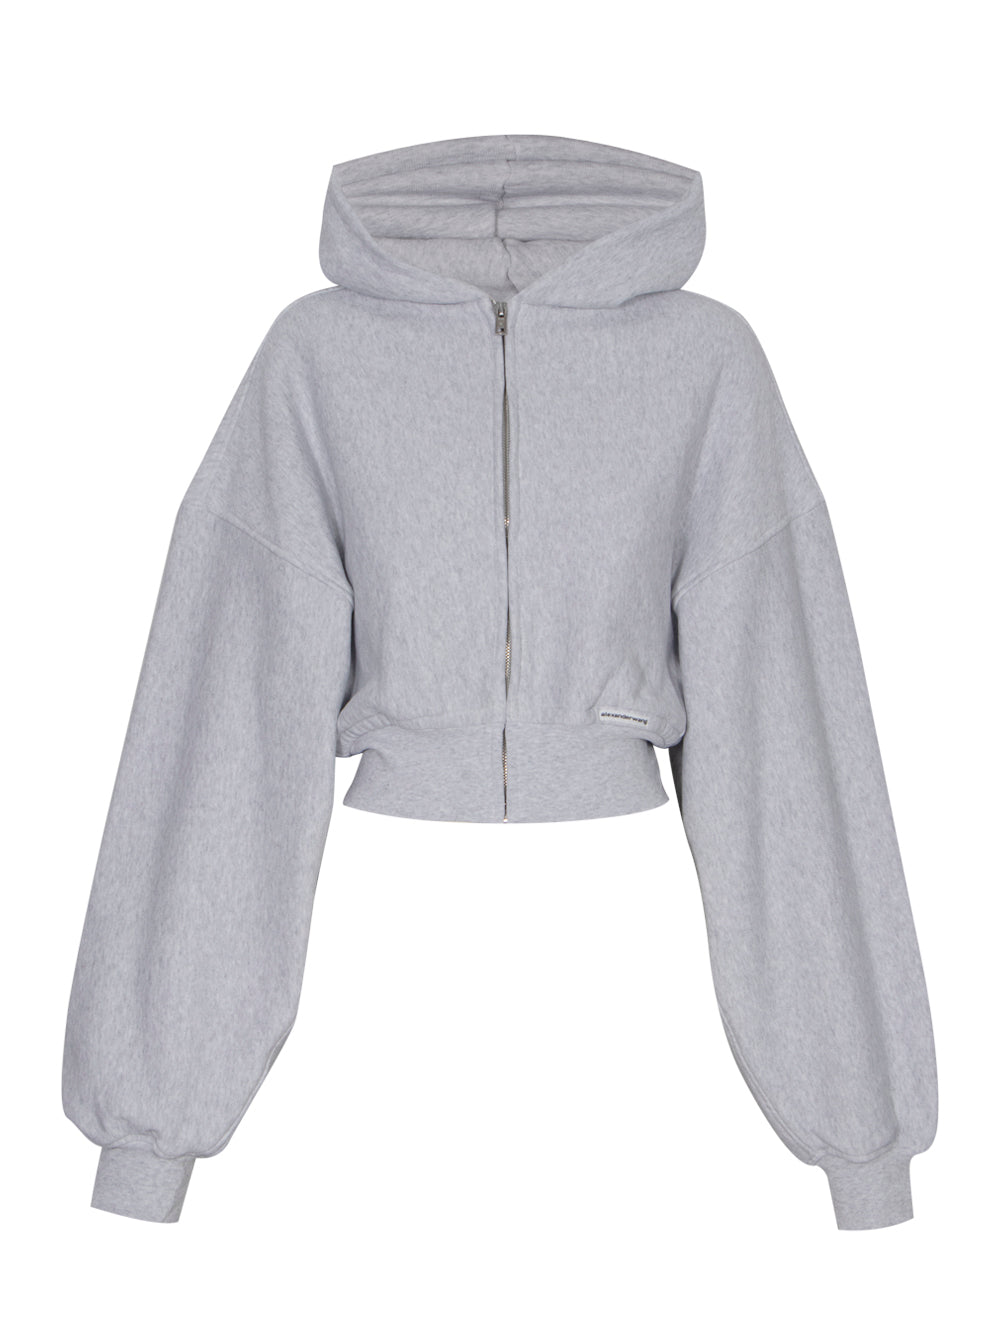 Cropped Zip Up Hoodie With Branded Seam Label (Light Heather Grey)